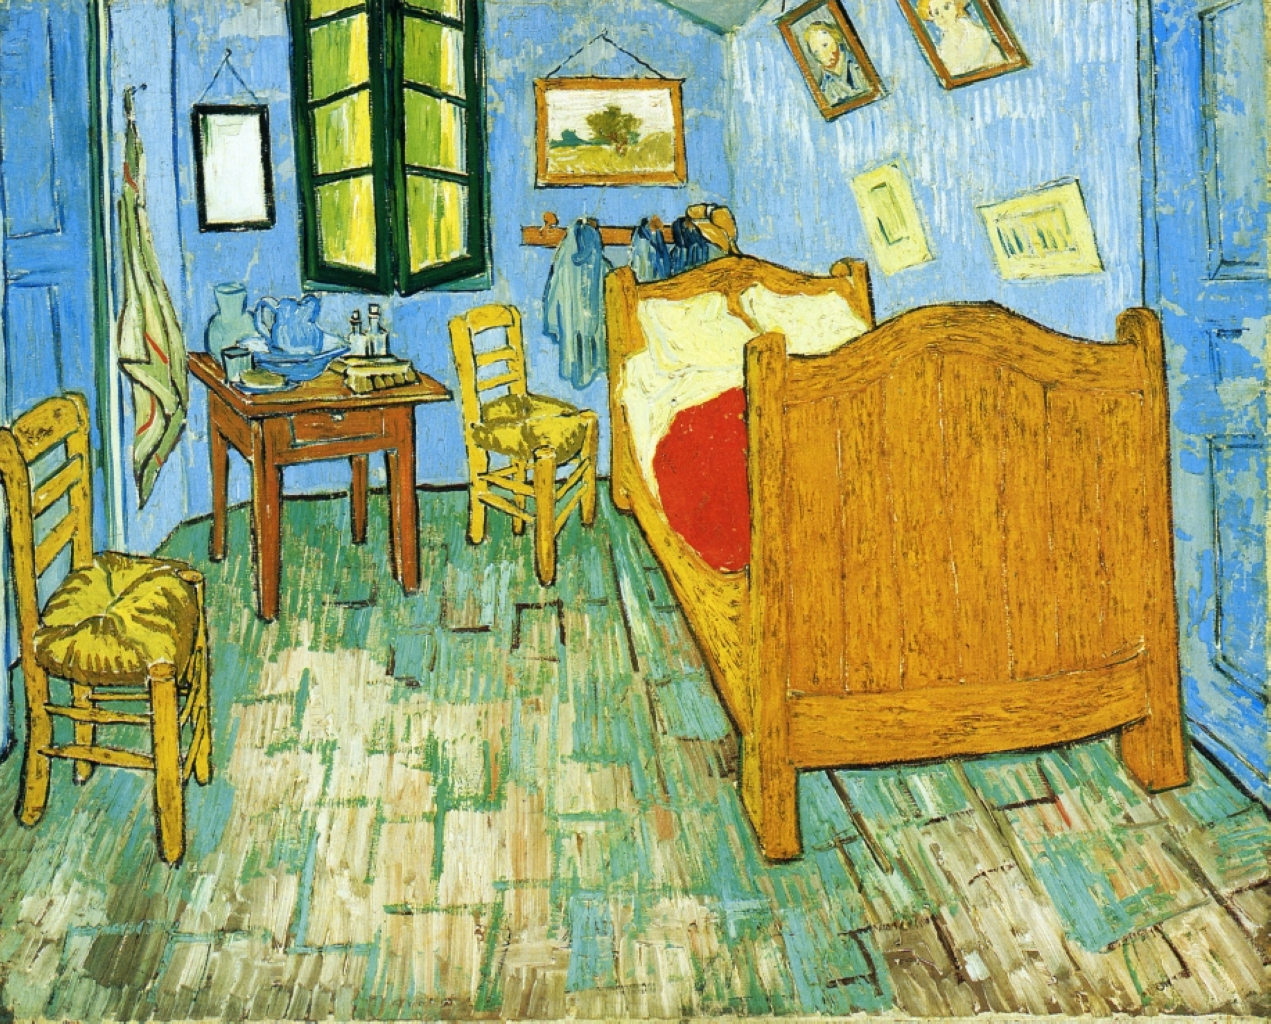 Vincent Van Gogh, Bedroom in Arles, 1889. Oil on canvas. Art Institute of Chicago, Illinois